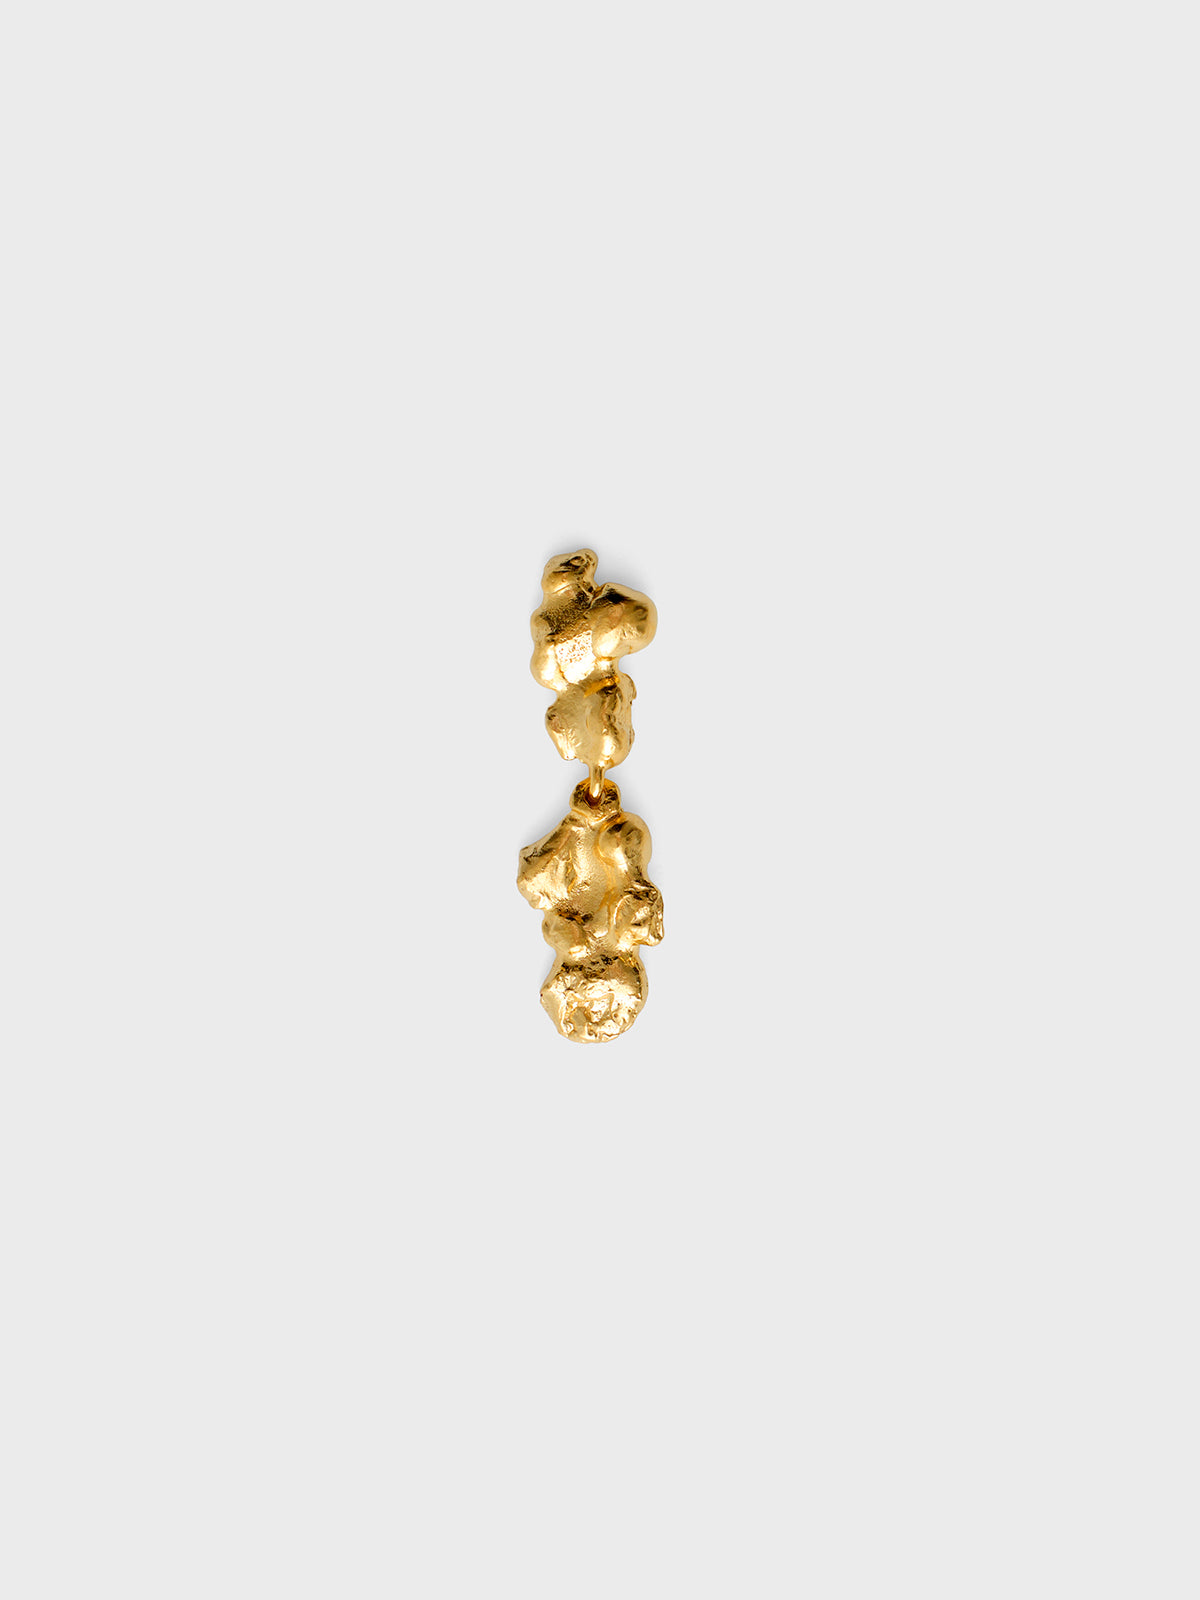 Lea Hoyer - Karla Earring with Gold Plating